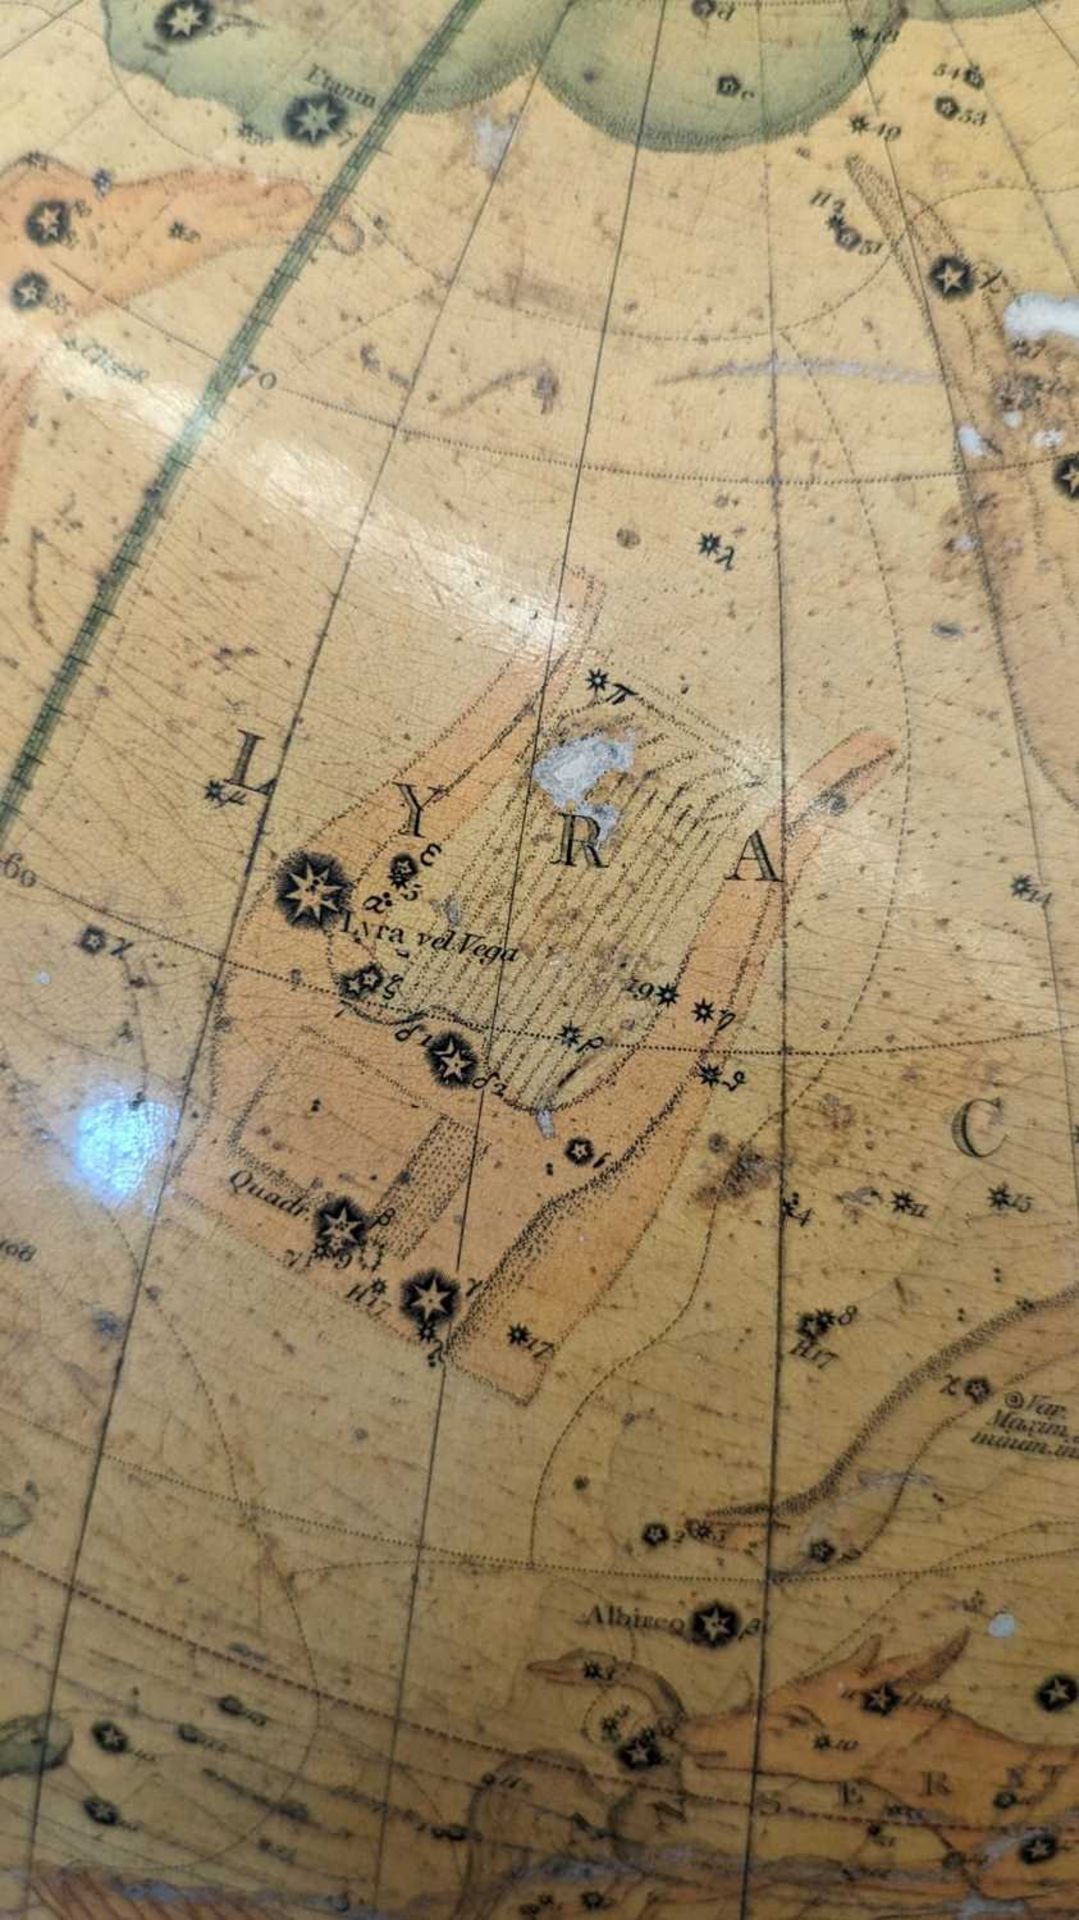 A large celestial library globe by J & W Cary, - Image 15 of 84